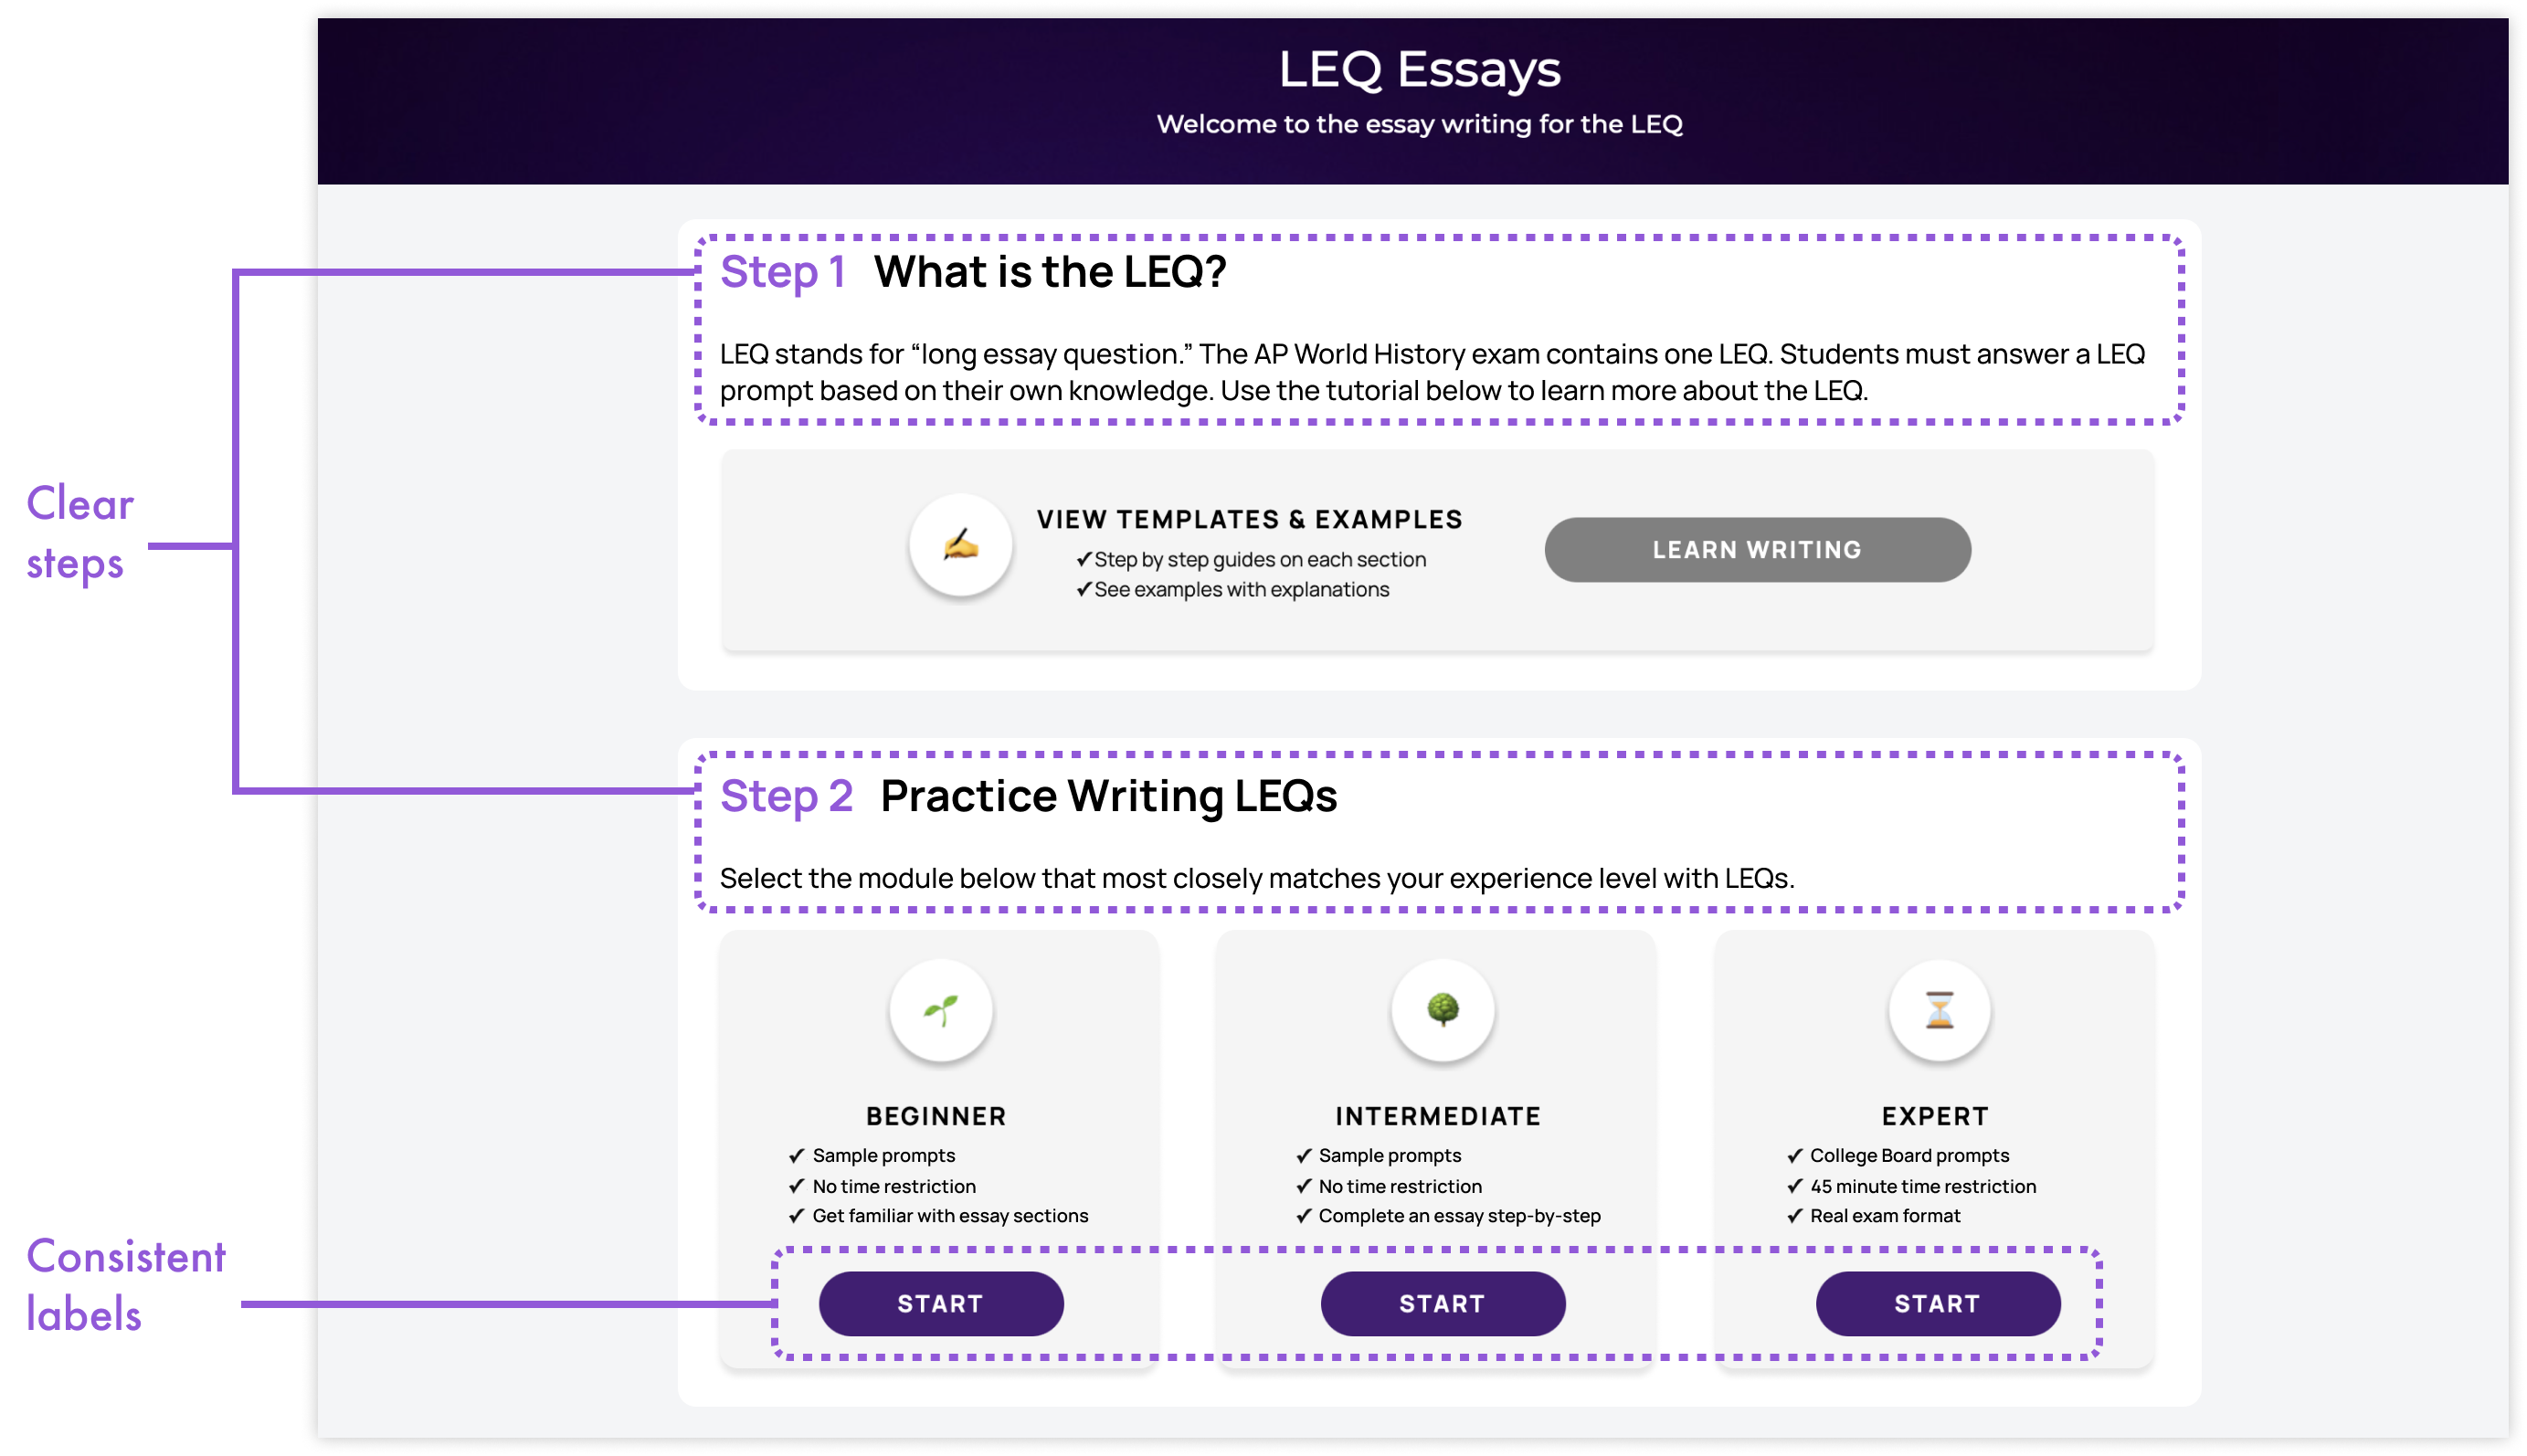 Mockup showing clear steps restructuring the page: 'Step 1: What is the LEQ?' and 'Step 2: Practice Writing LEQs'; a consistent 'Start' label was added to each module